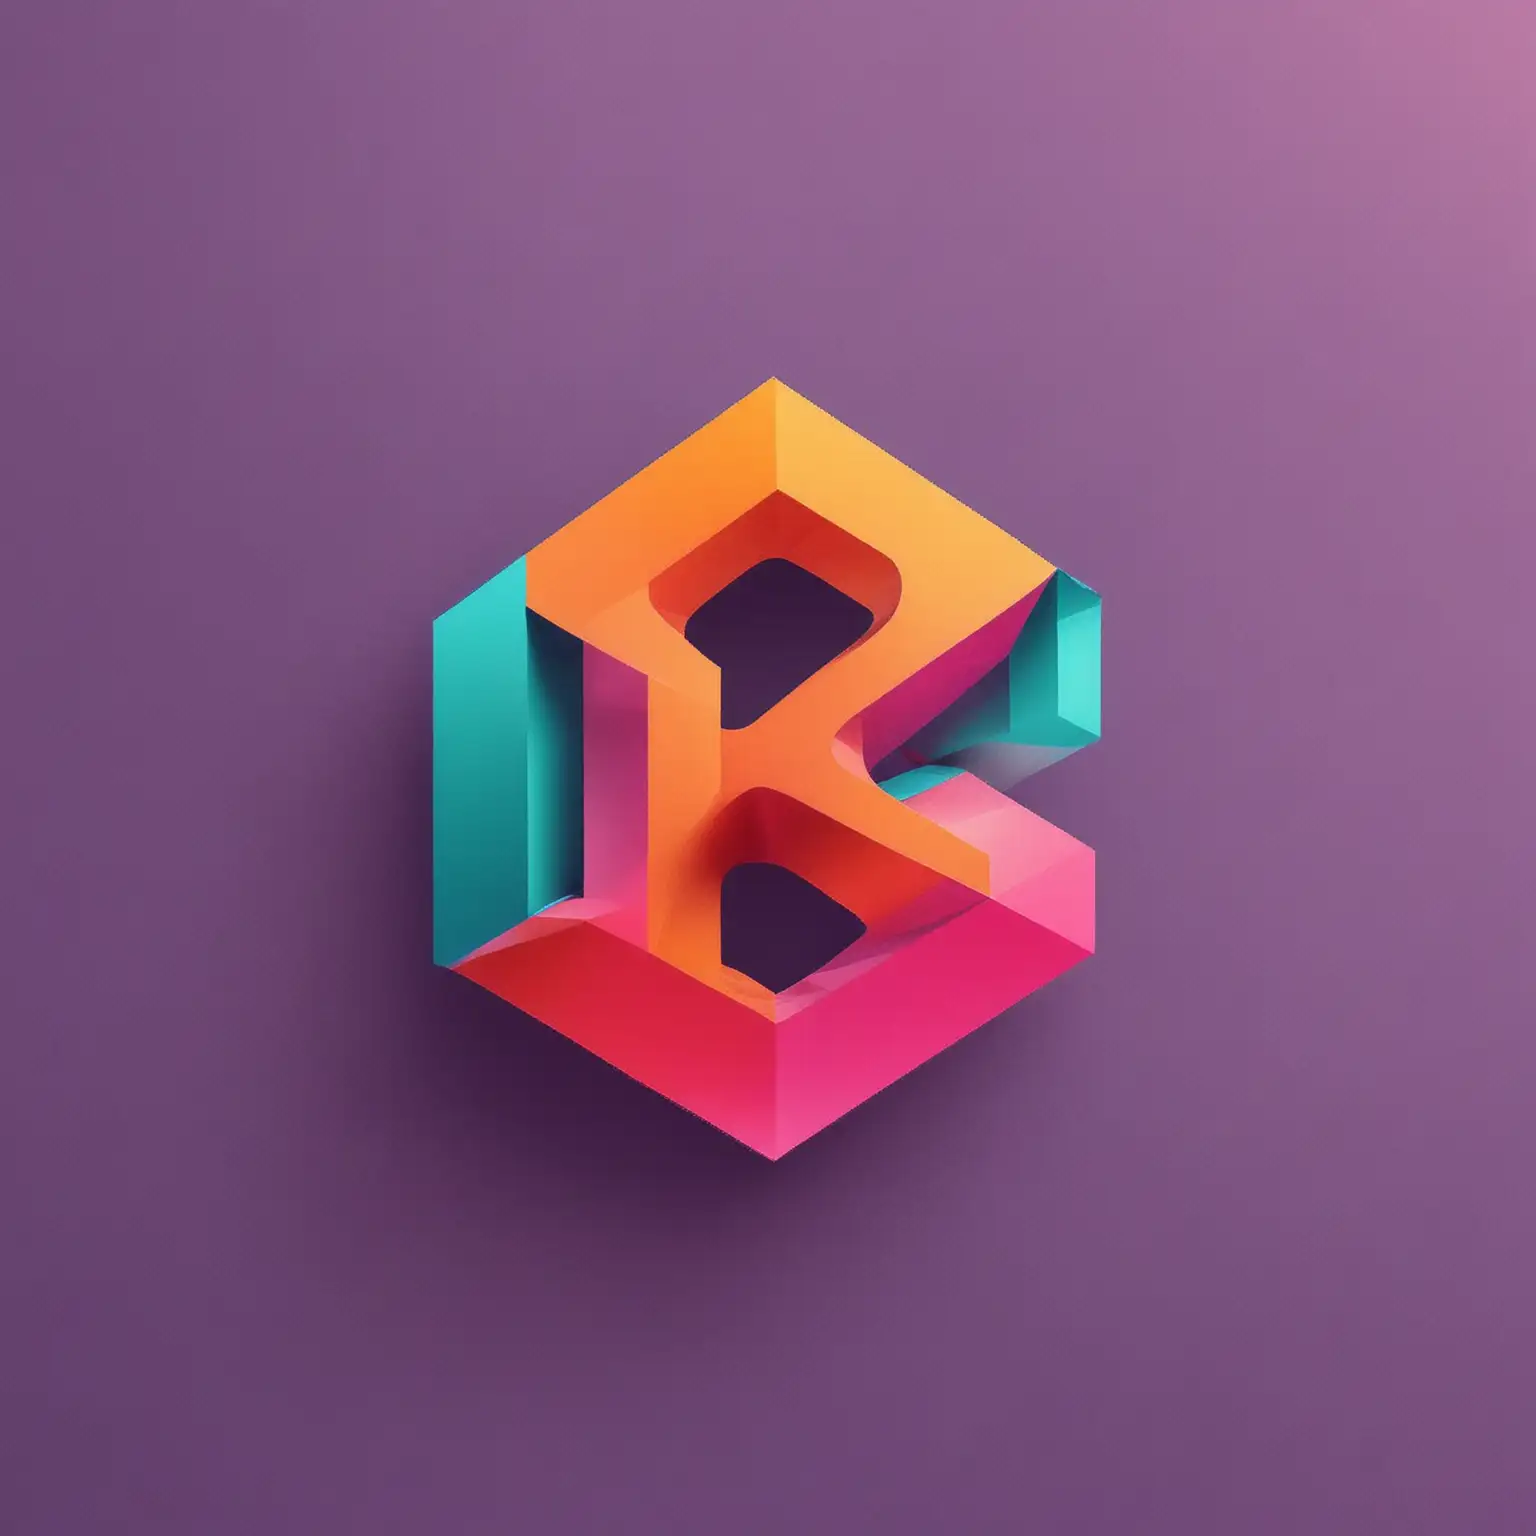 Minimalist Business Logo with Geometric B and Vibrant Colors